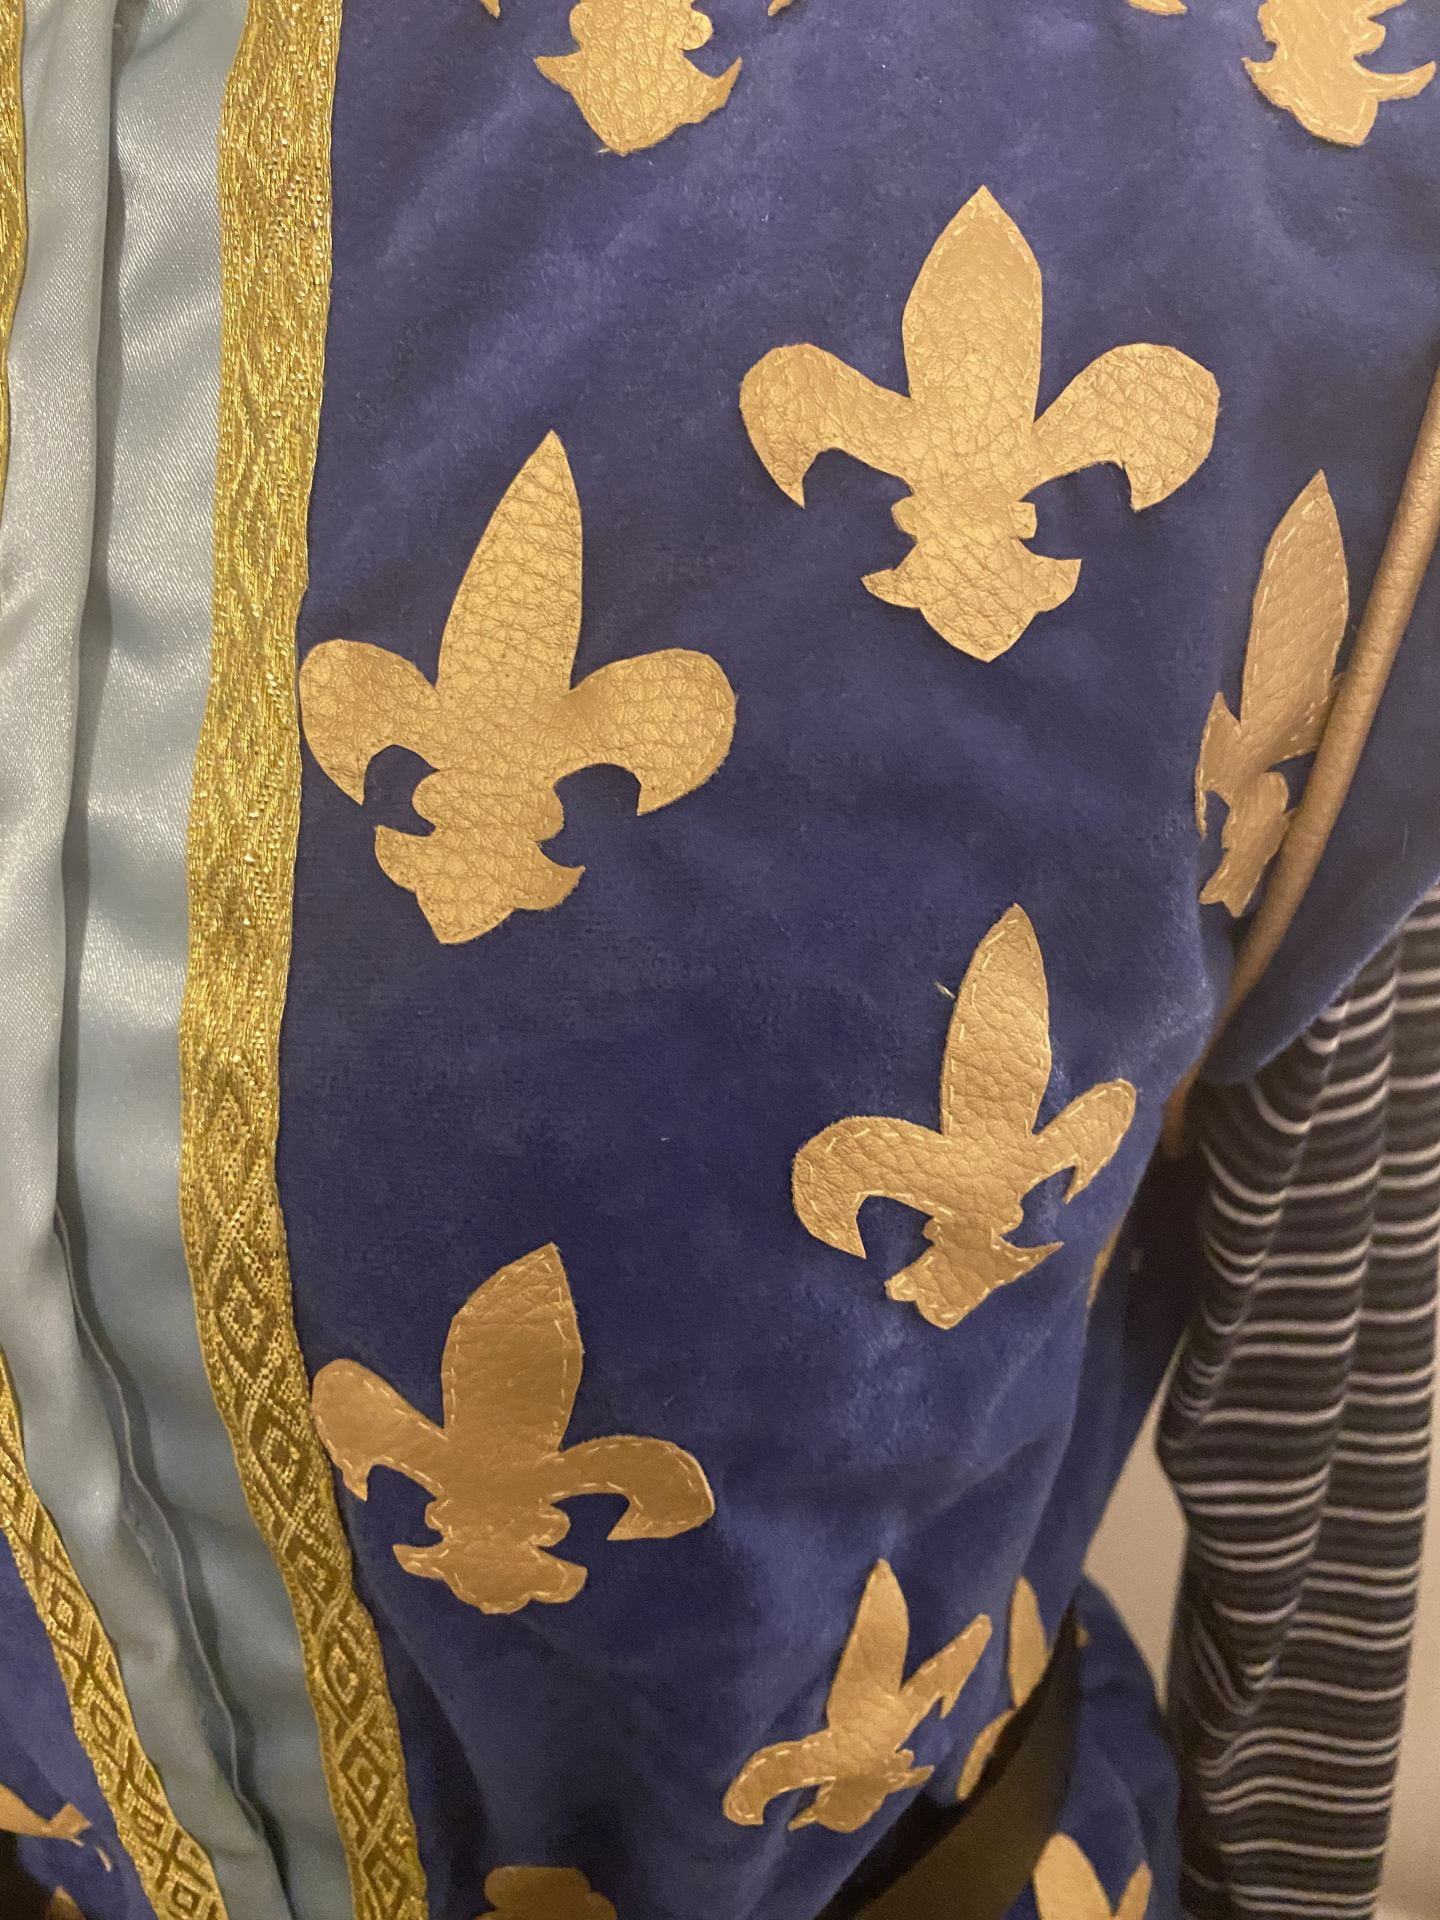 Close up for the blue and gold bodice details. Shoes the gold details and the stitching.